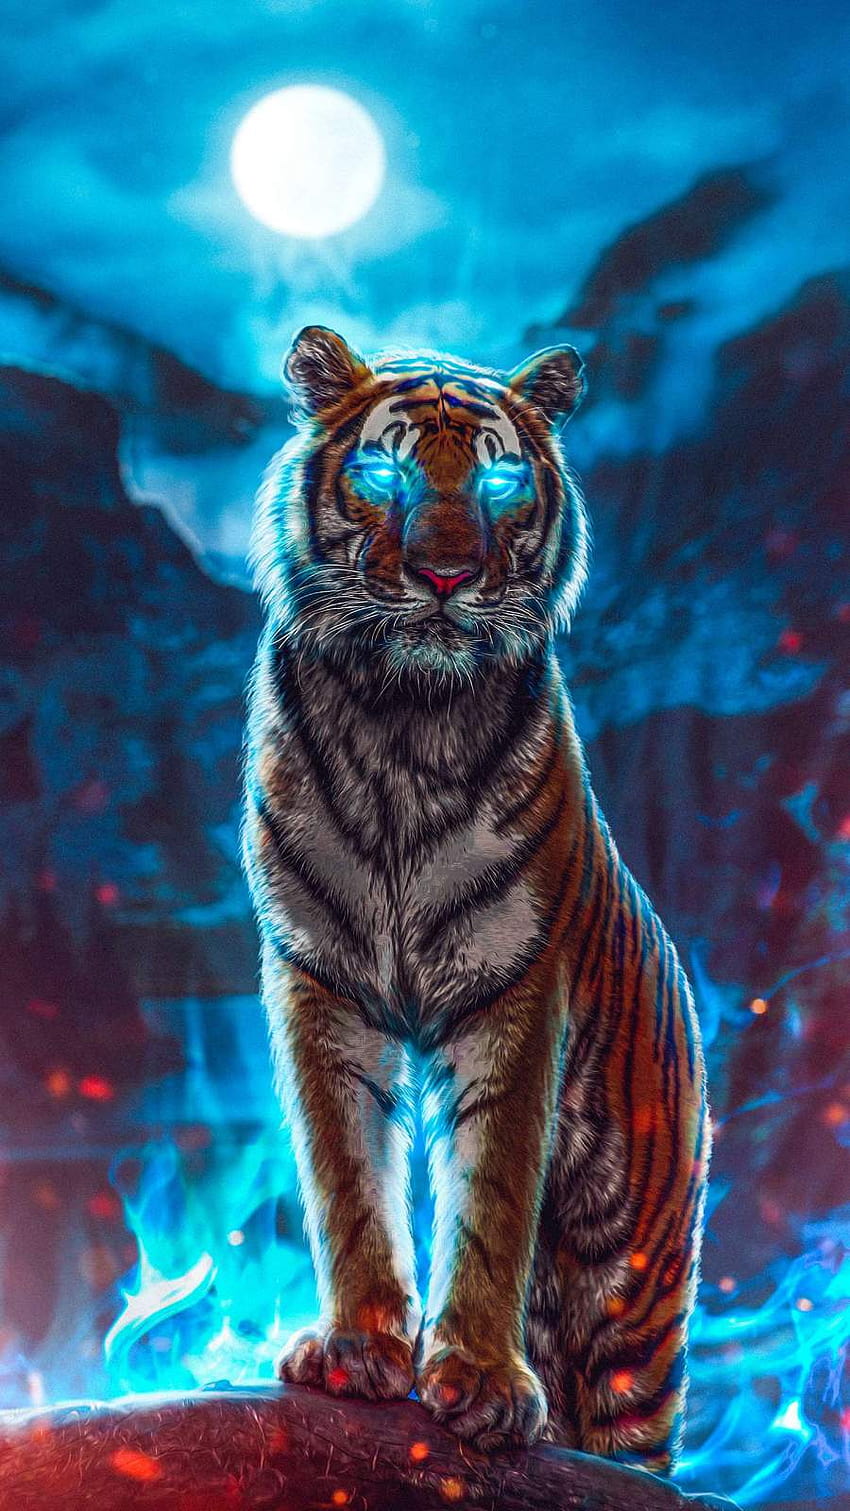 The Tiger IPhone HD phone wallpaper | Pxfuel